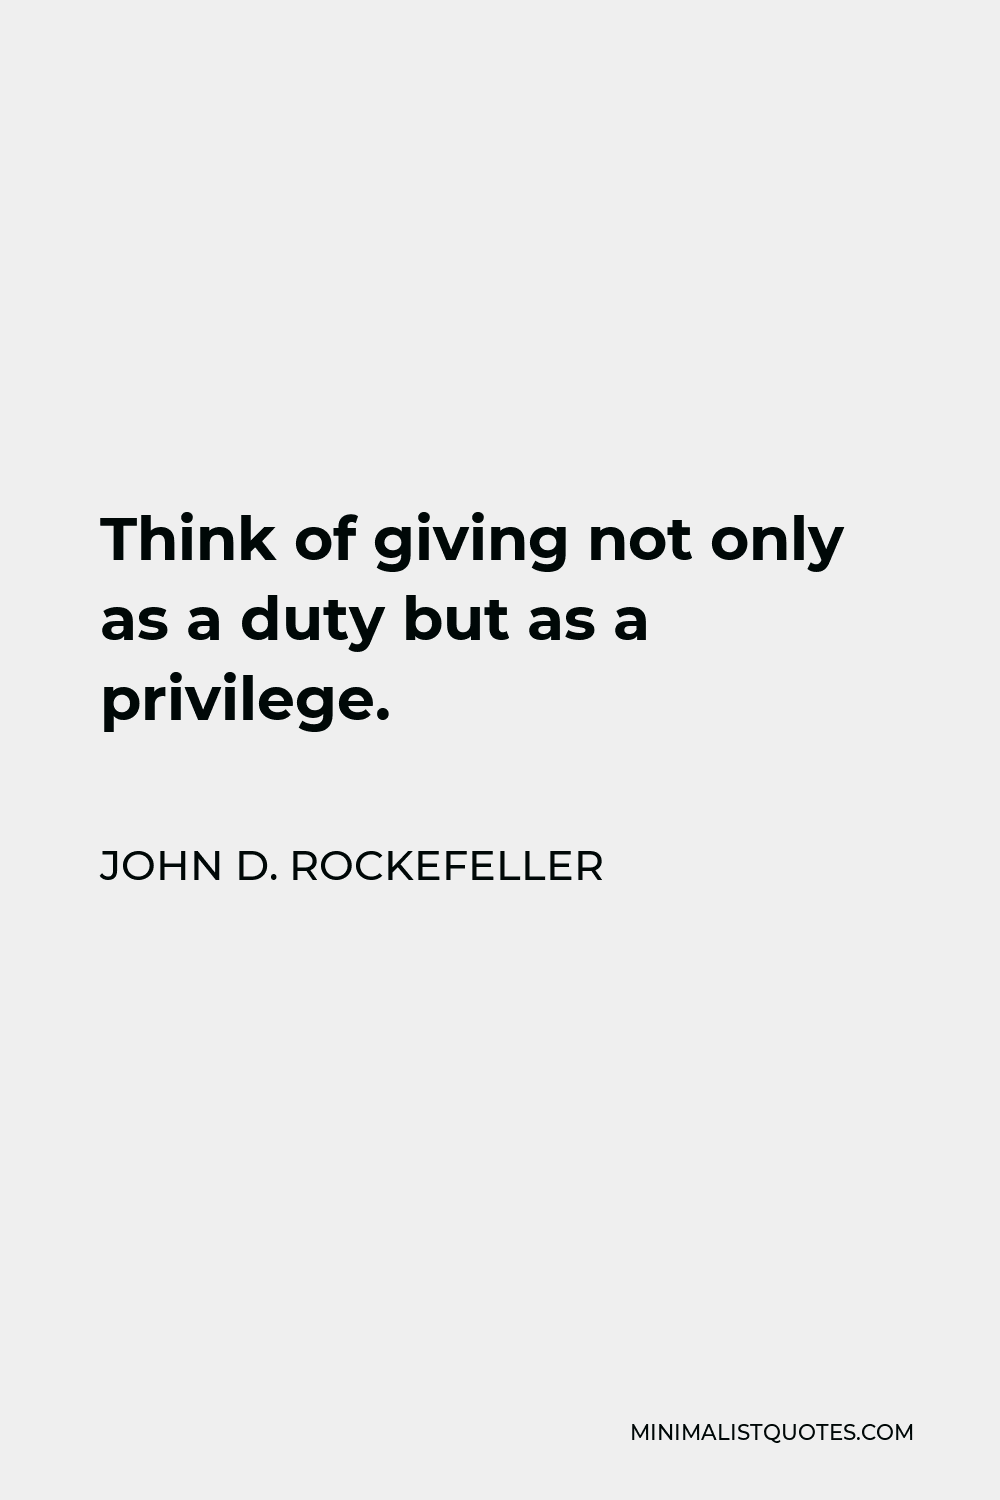 John D. Rockefeller Quote - Think of giving not only as a duty but as a privilege.